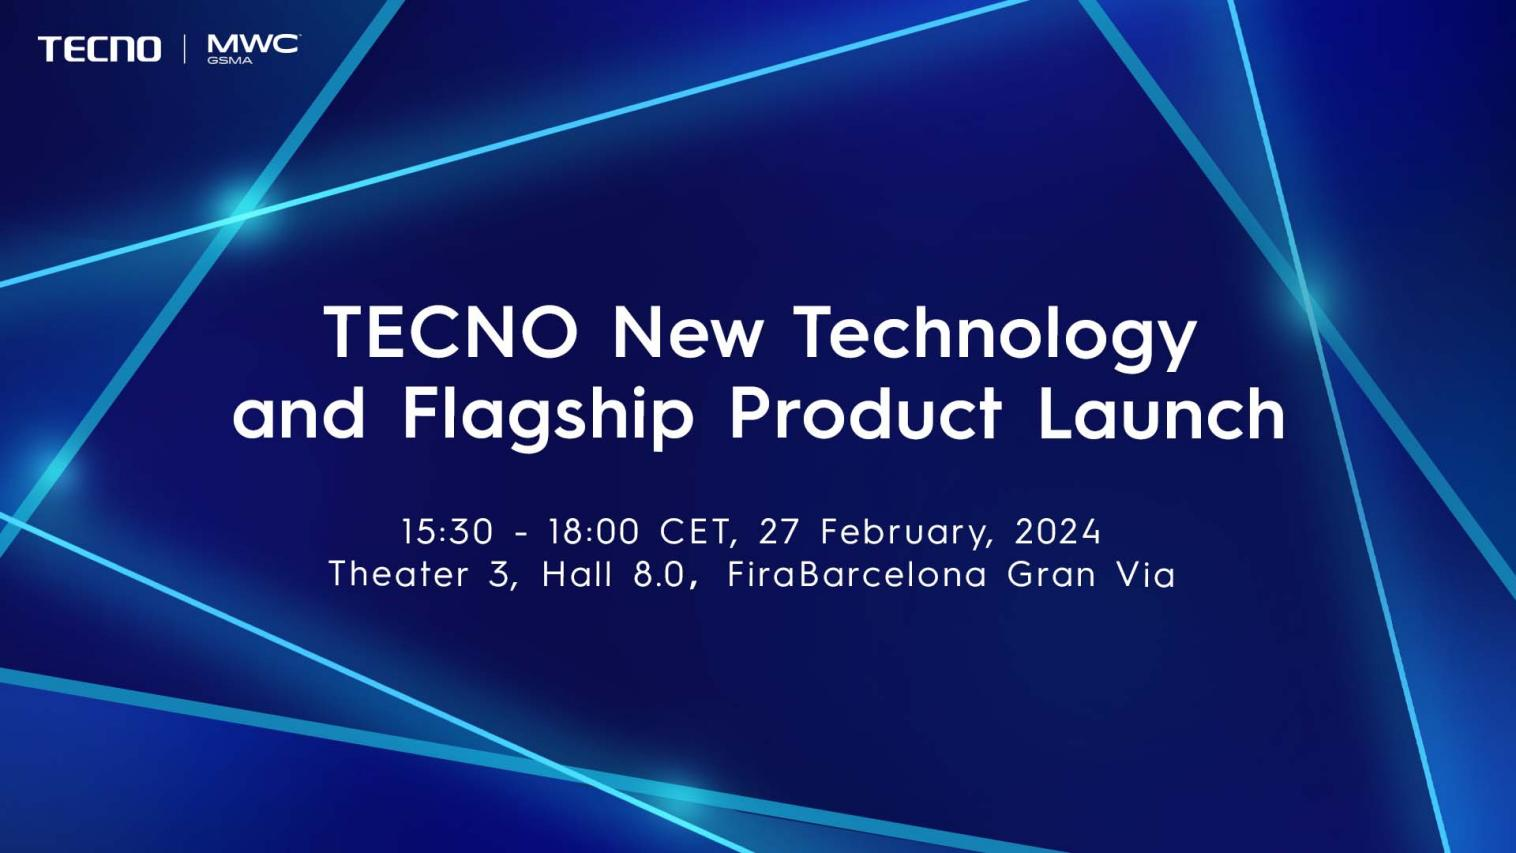 TECNO New Technology and Flagship Product Launch